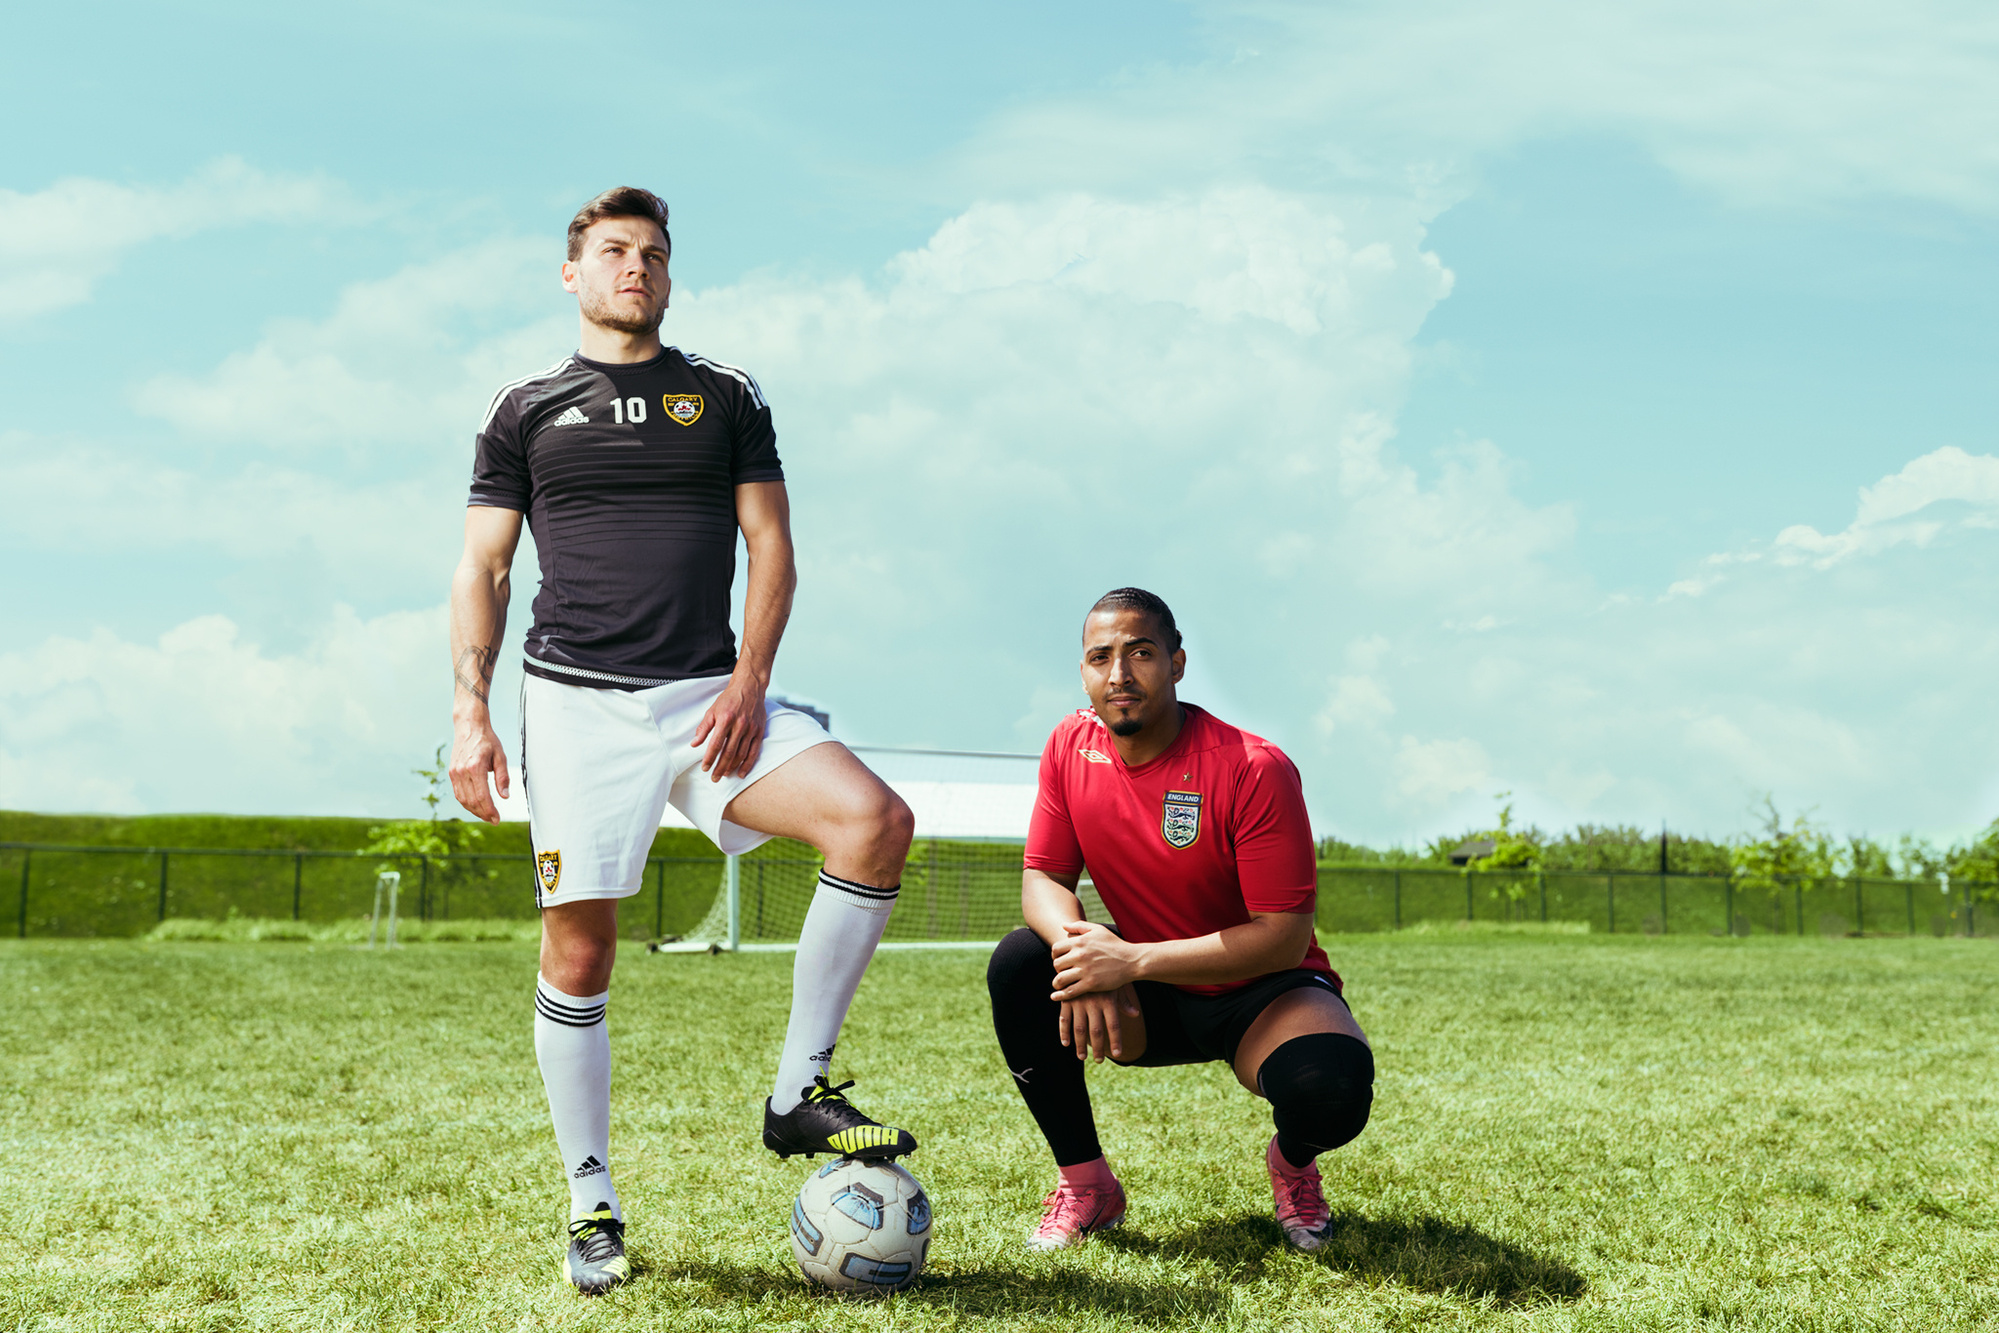 Yoann Promonet  Two Soccer Players standing in a field - Yvens B Photography